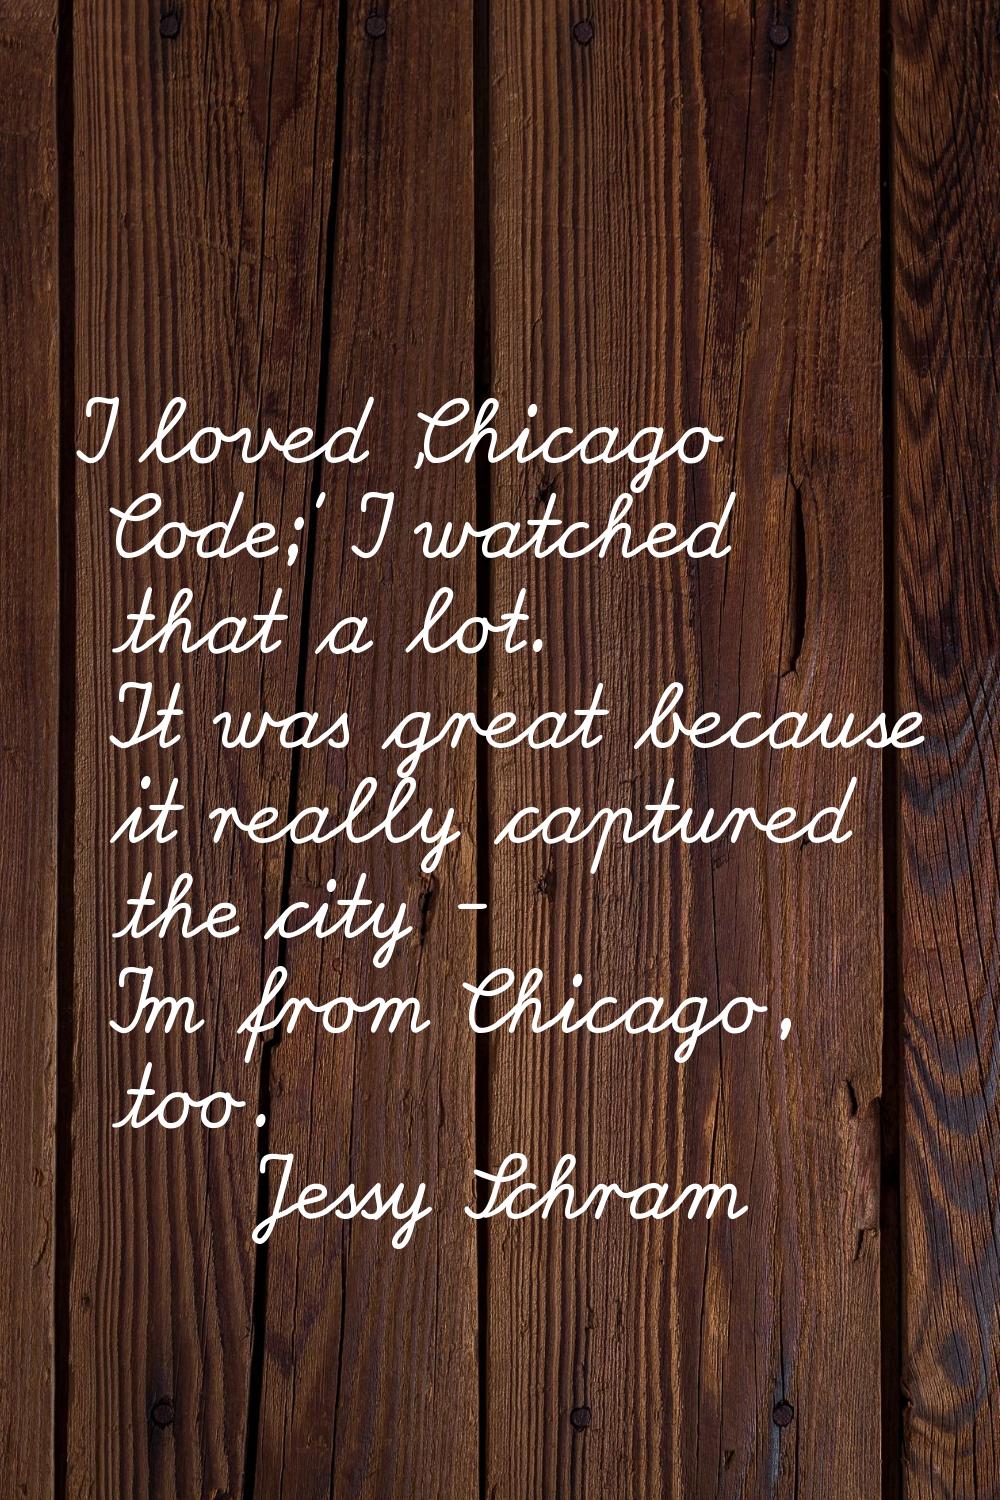 I loved 'Chicago Code;' I watched that a lot. It was great because it really captured the city - I'